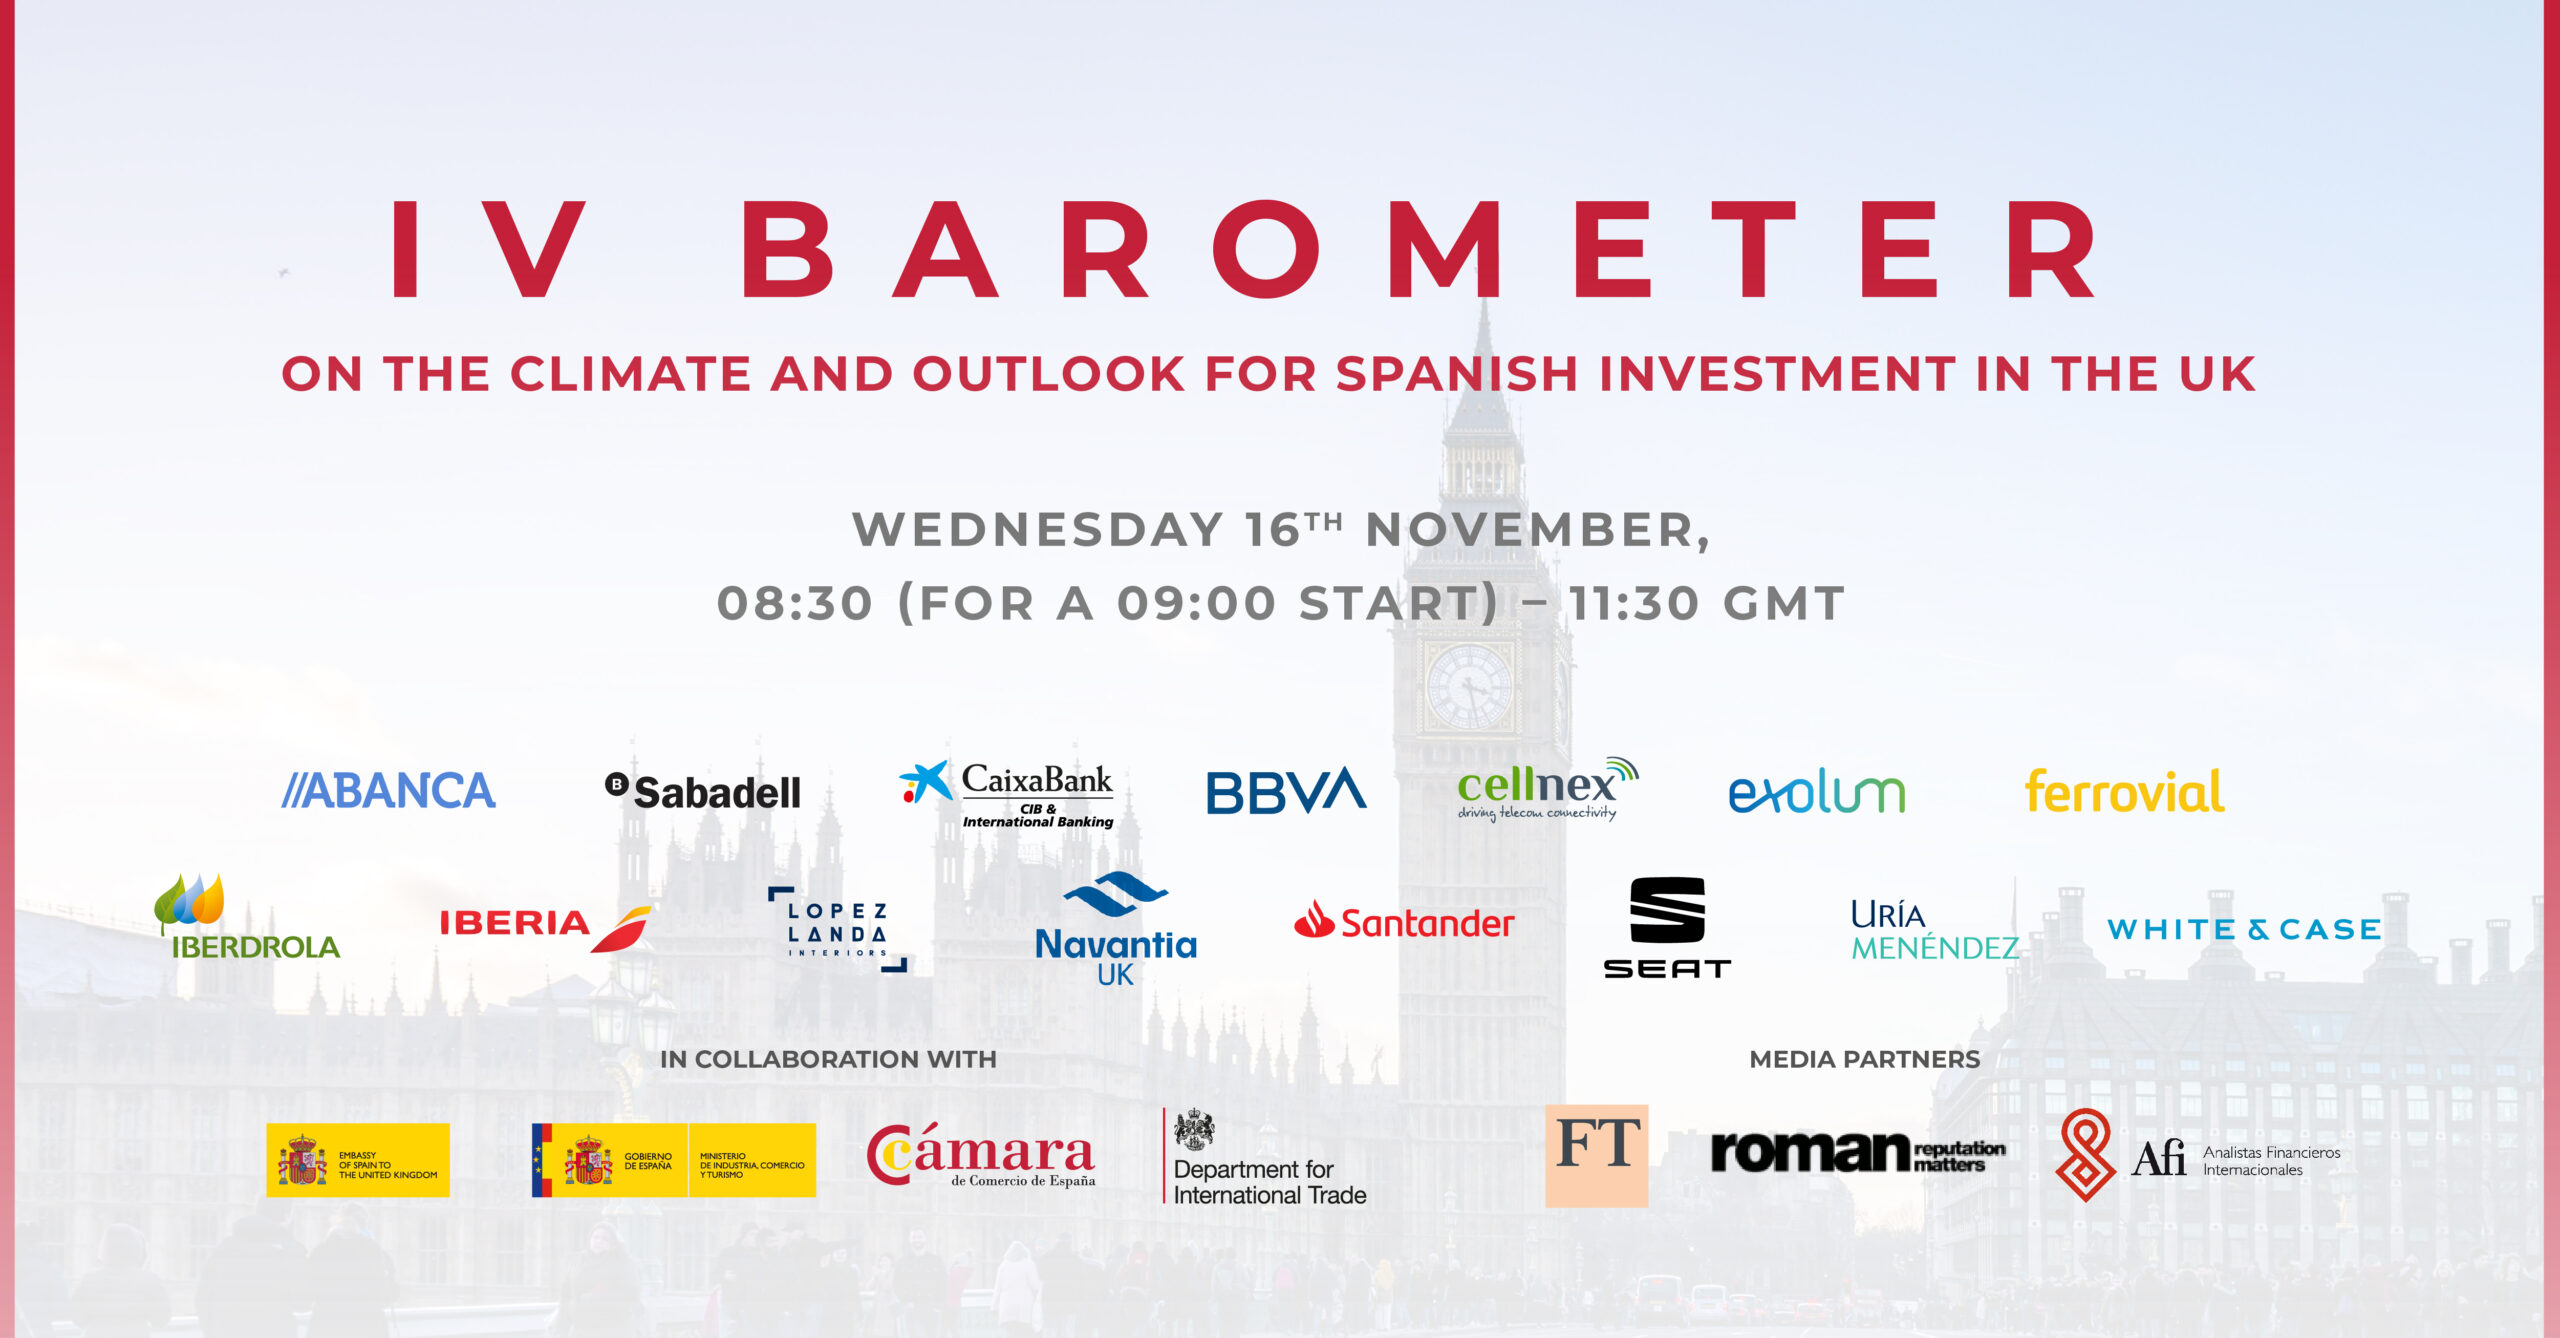 IV BAROMETER ON THE CLIMATE AND OUTLOOK FOR SPANISH INVESTMENT IN THE UK 